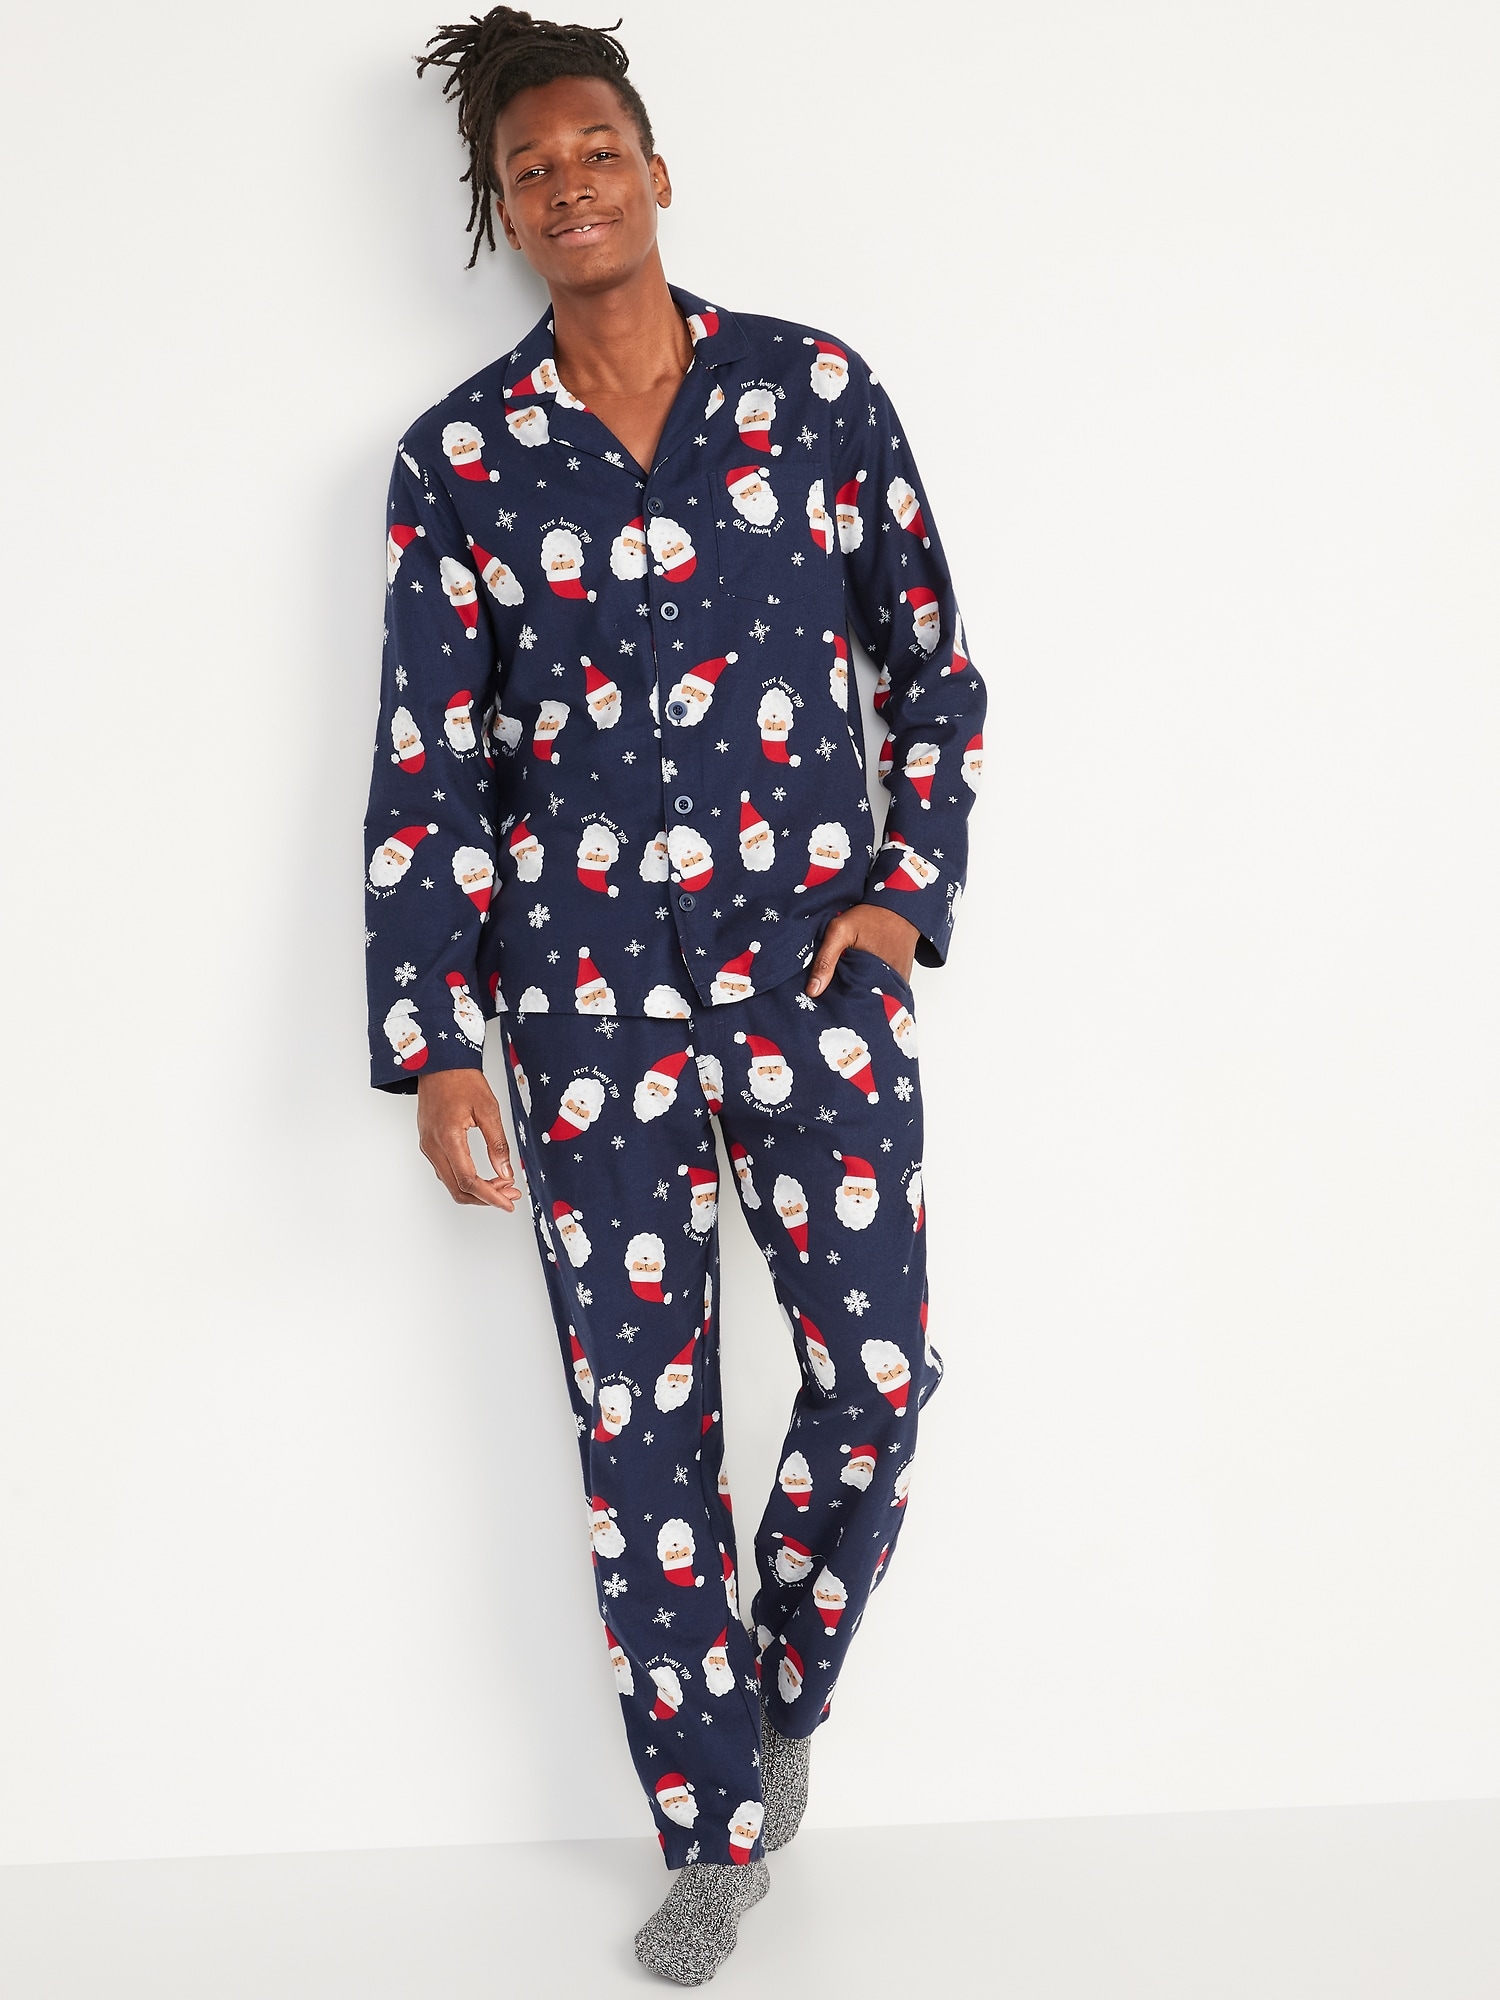 Matching Holiday Flannel Pajamas Set for Men | Old Navy